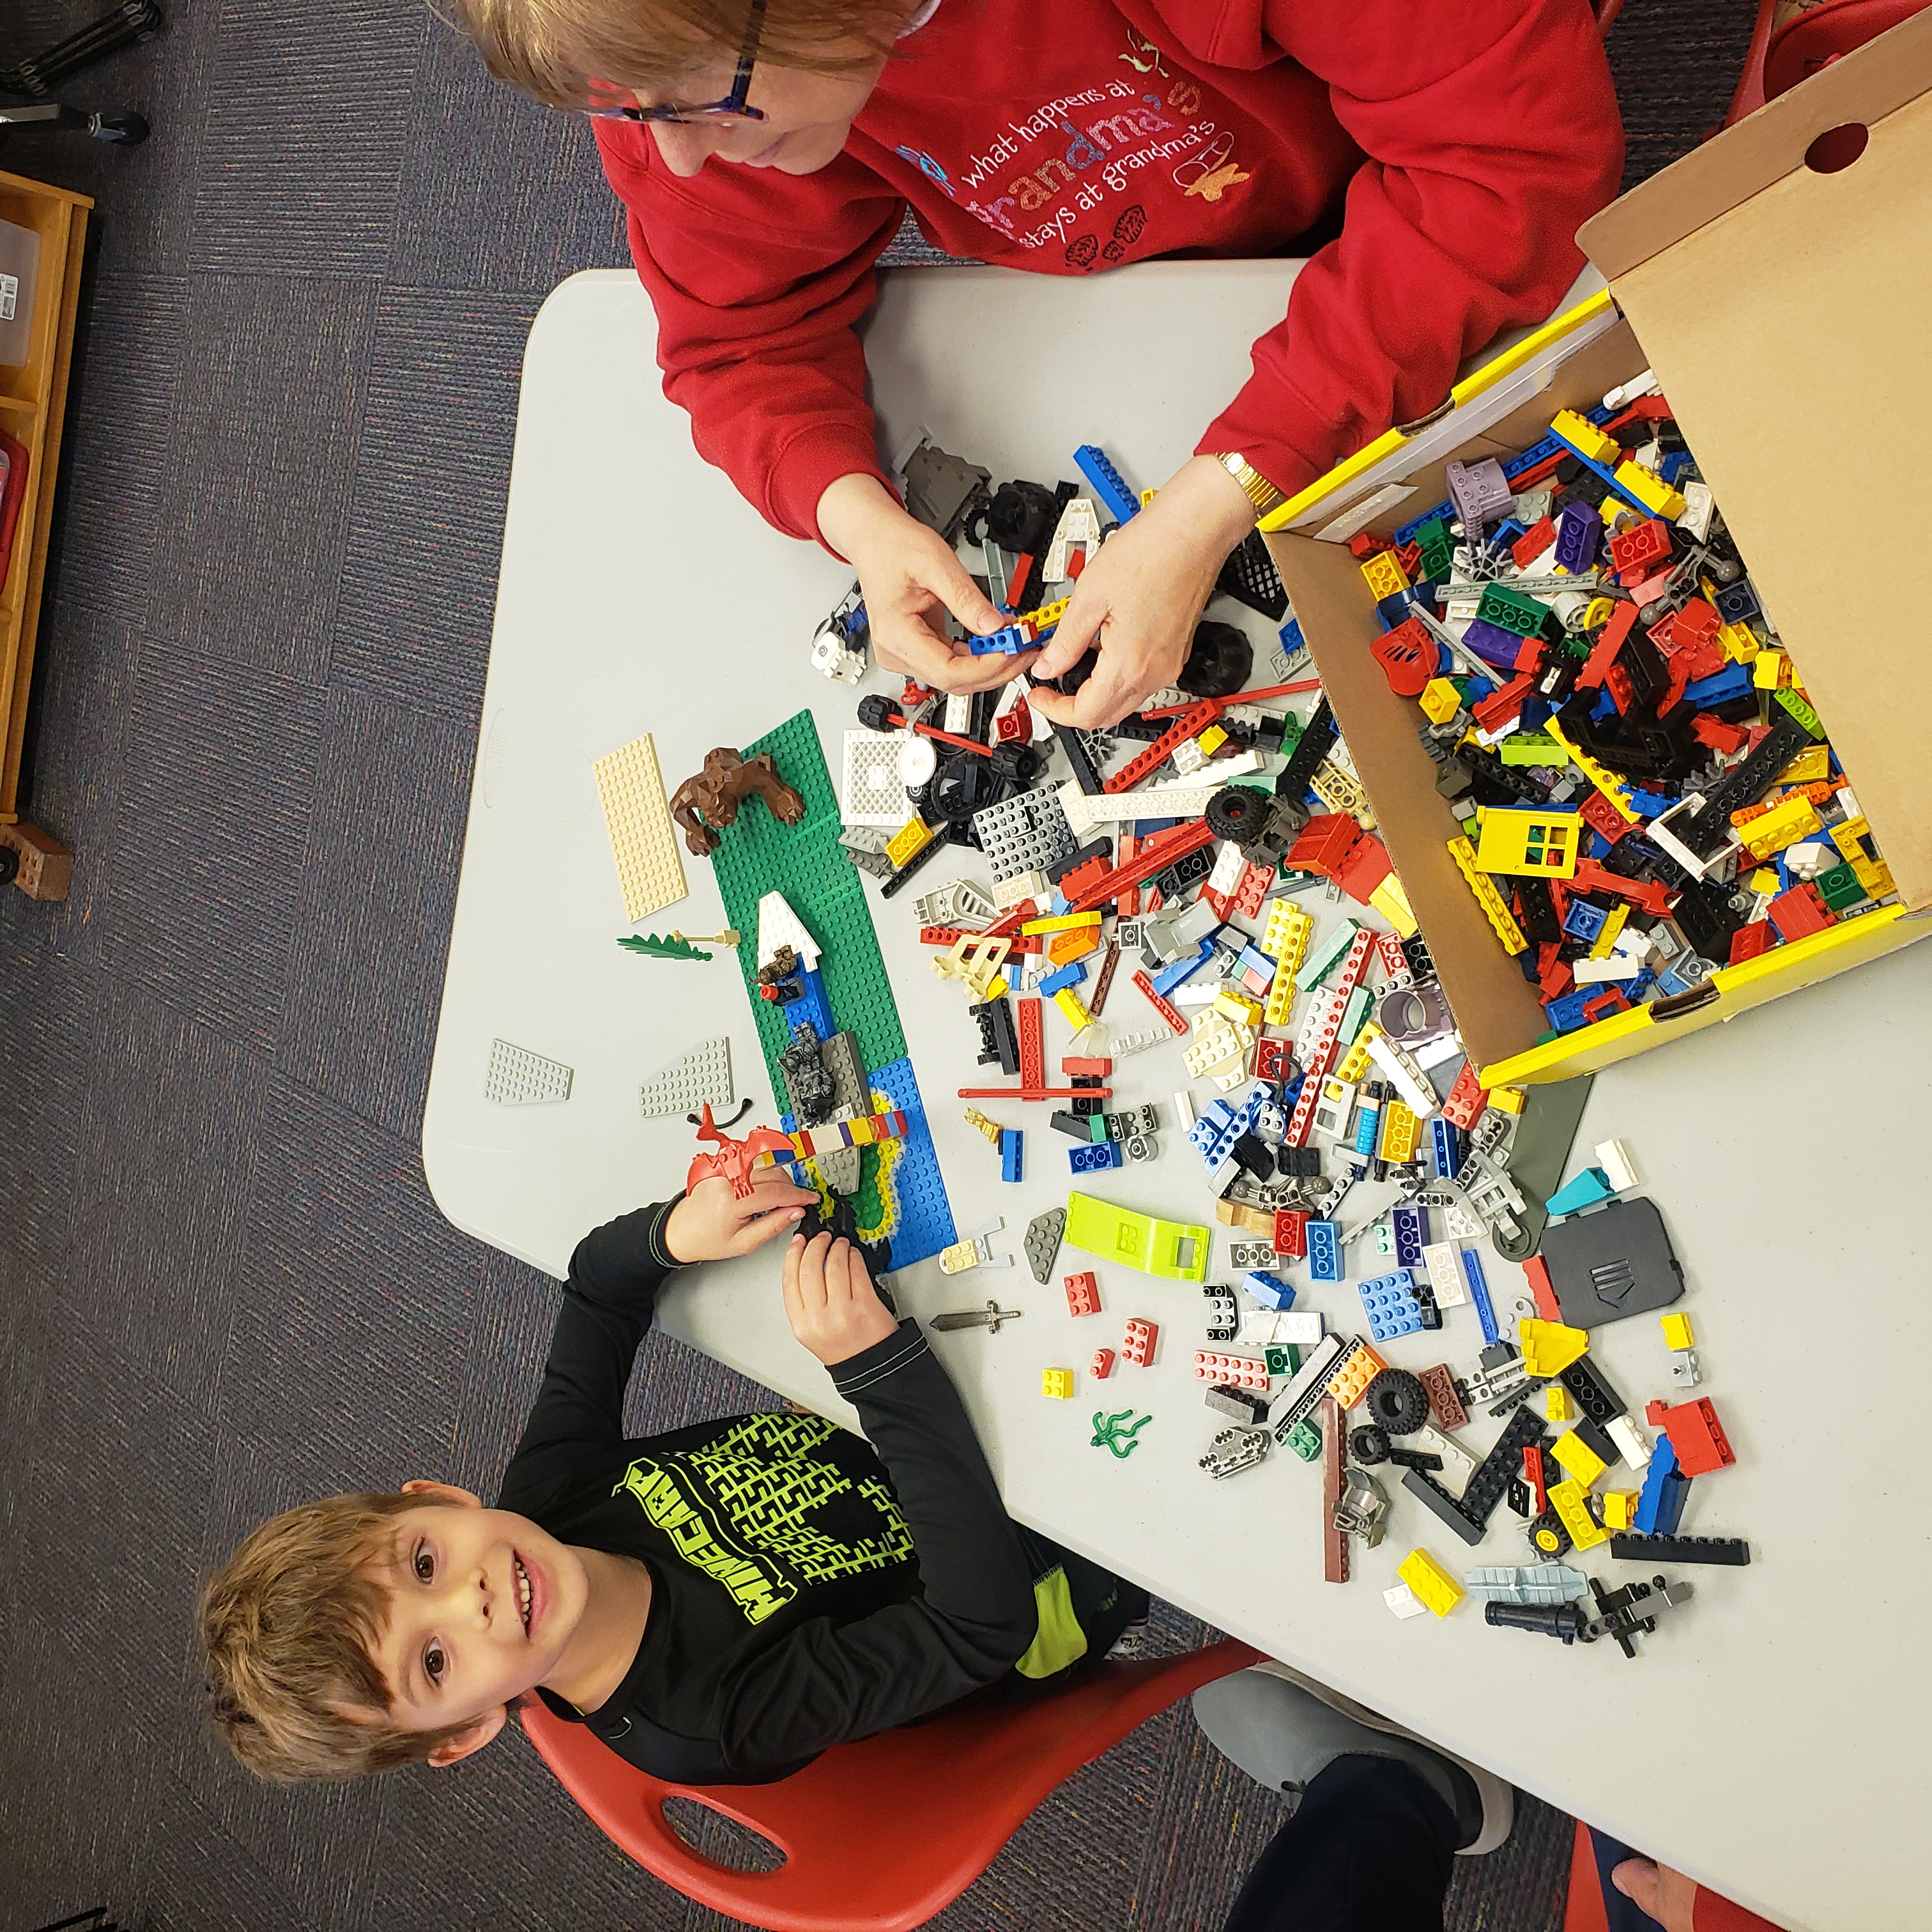 Boy and grandmother with Lego building pieces between them on the table.